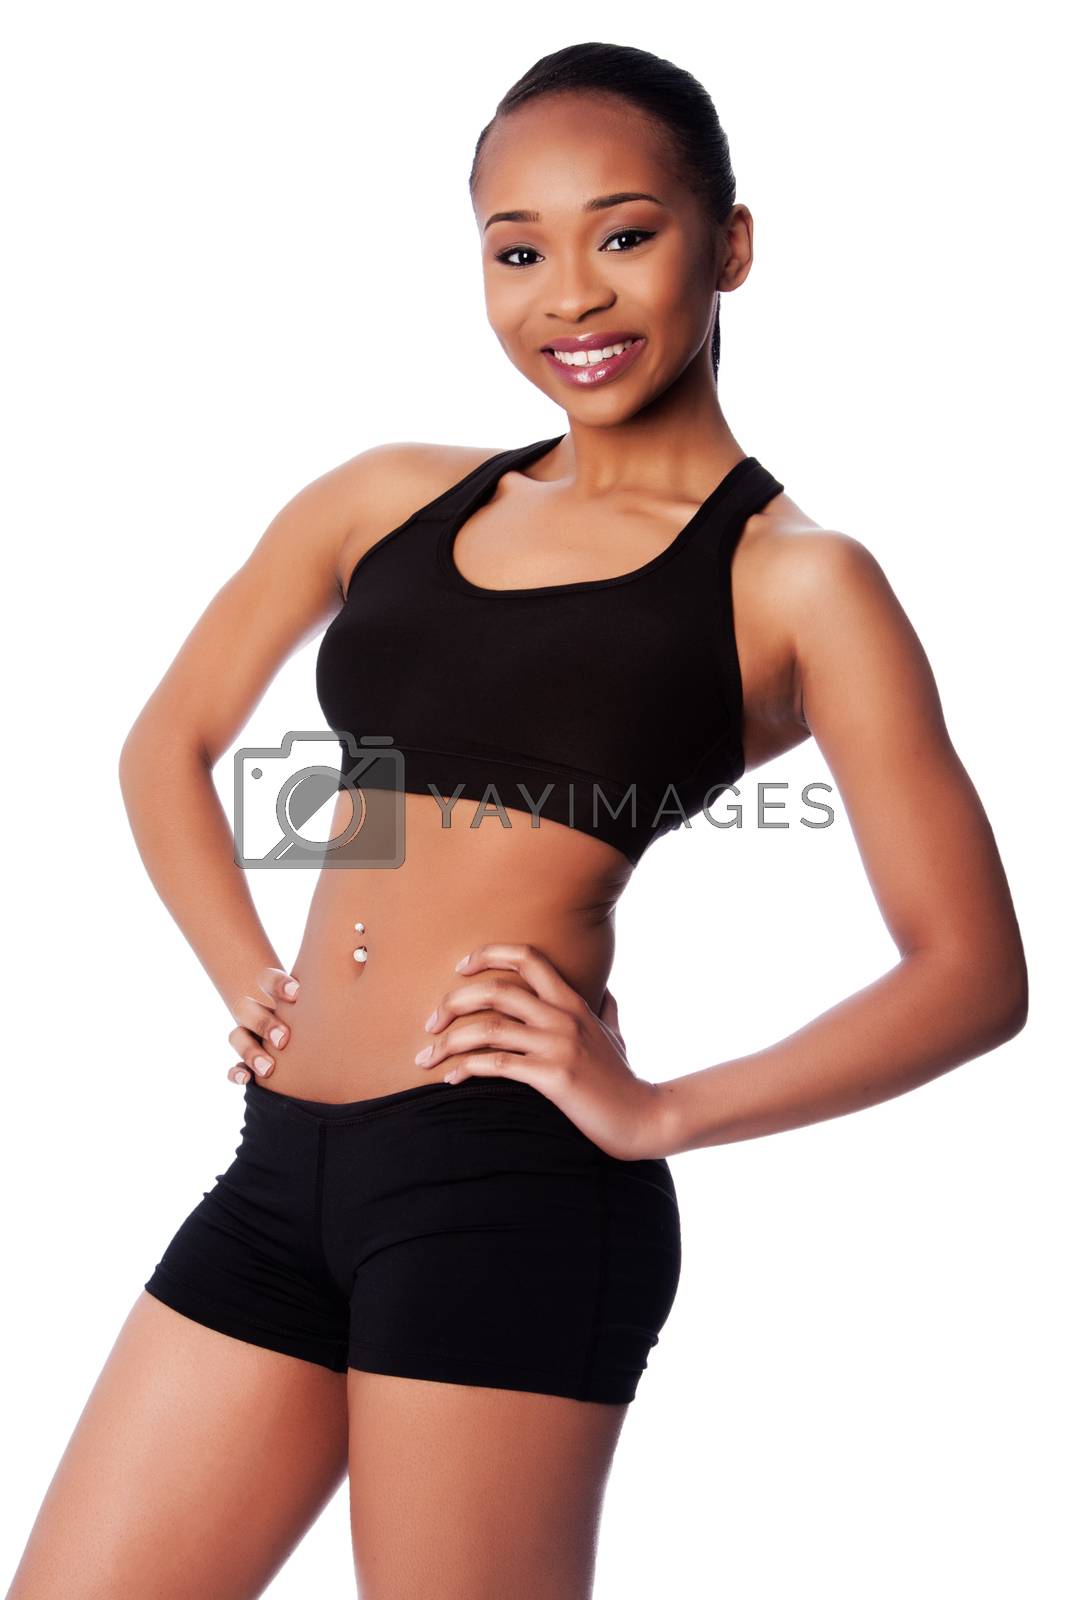 Royalty free image of Happy healthy fit black asian woman  by phakimata